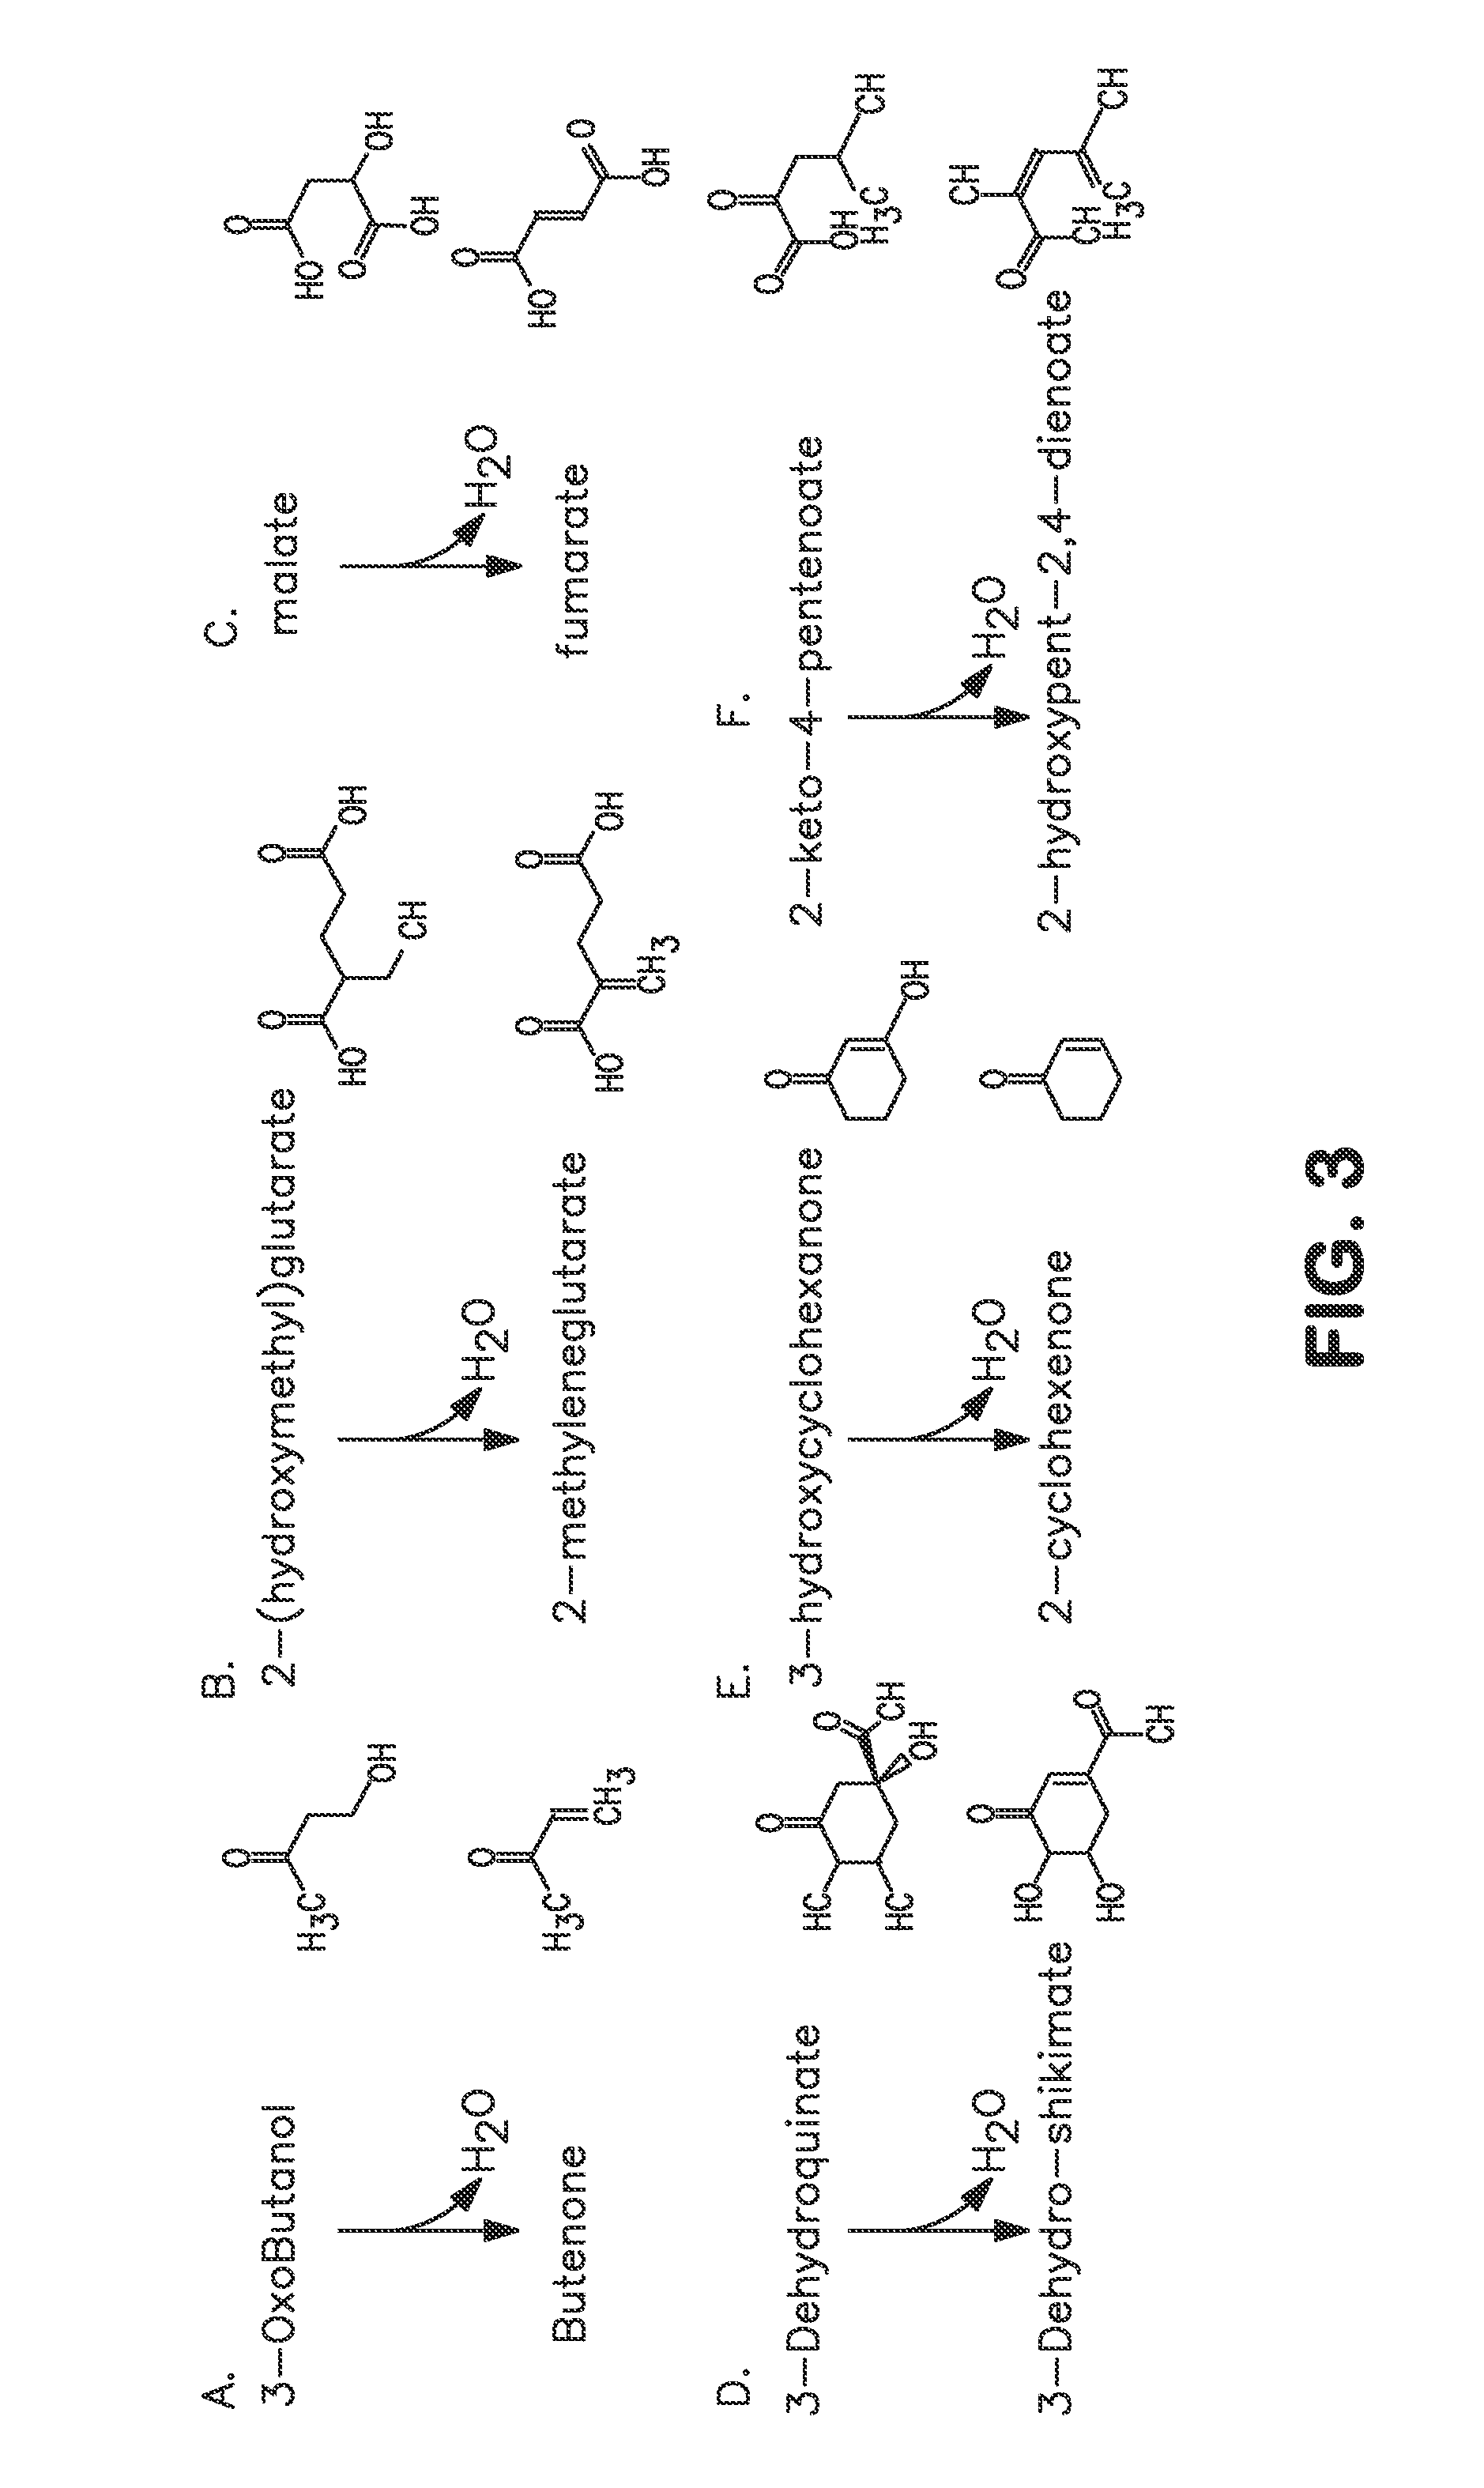 Microorganisms and methods for carbon-efficient biosynthesis of mek and 2-butanol